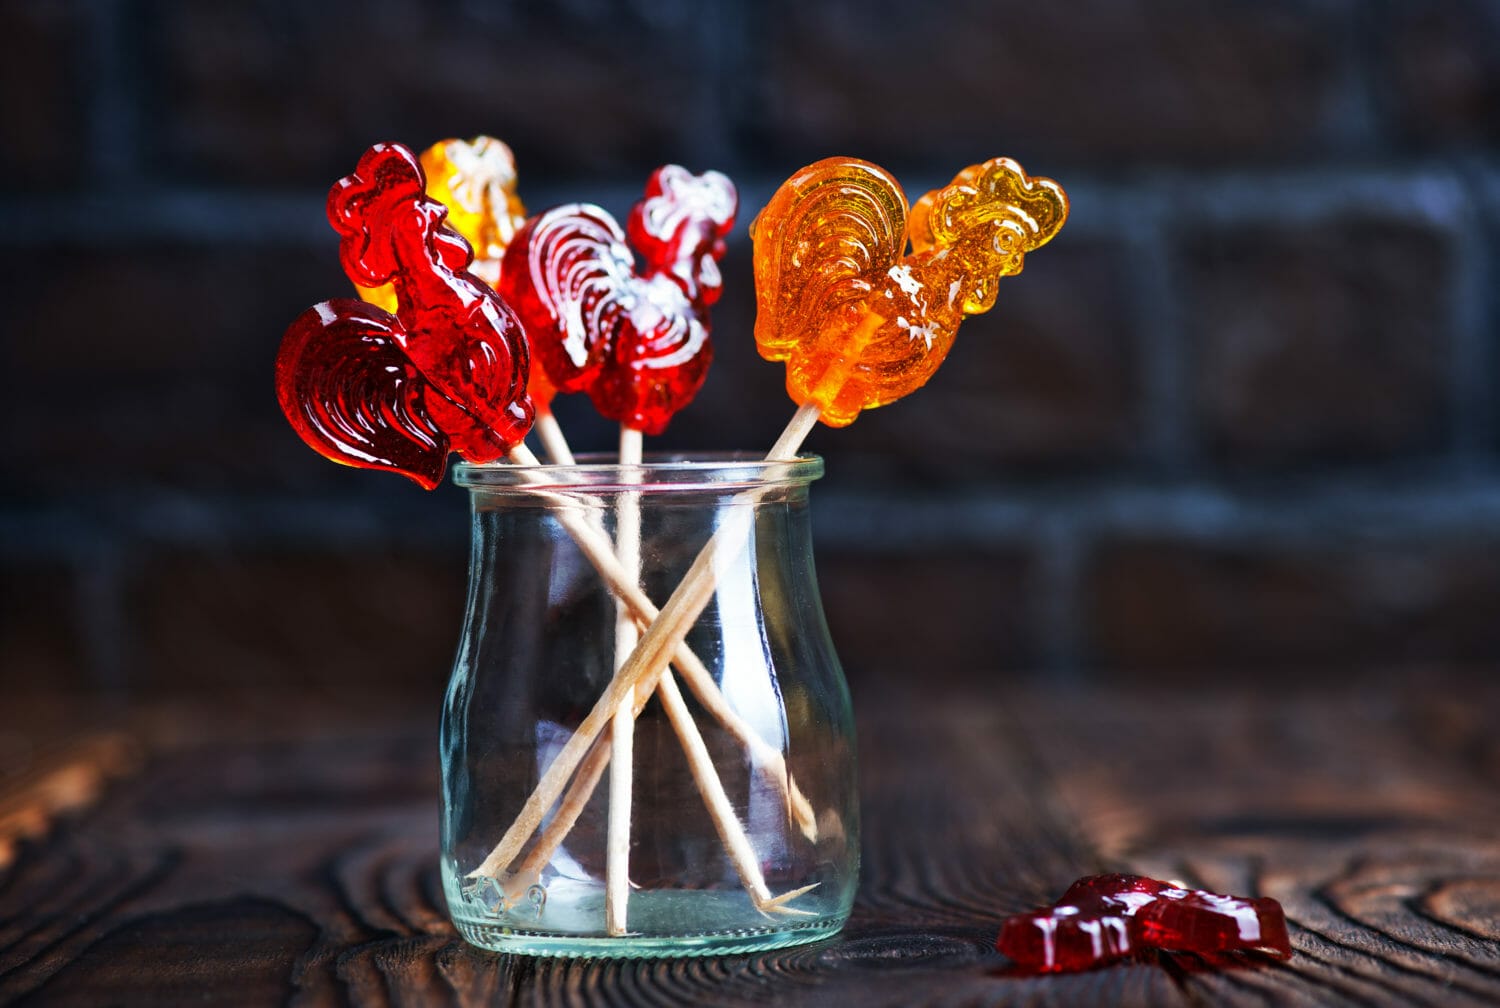 Candy roosters in a jar